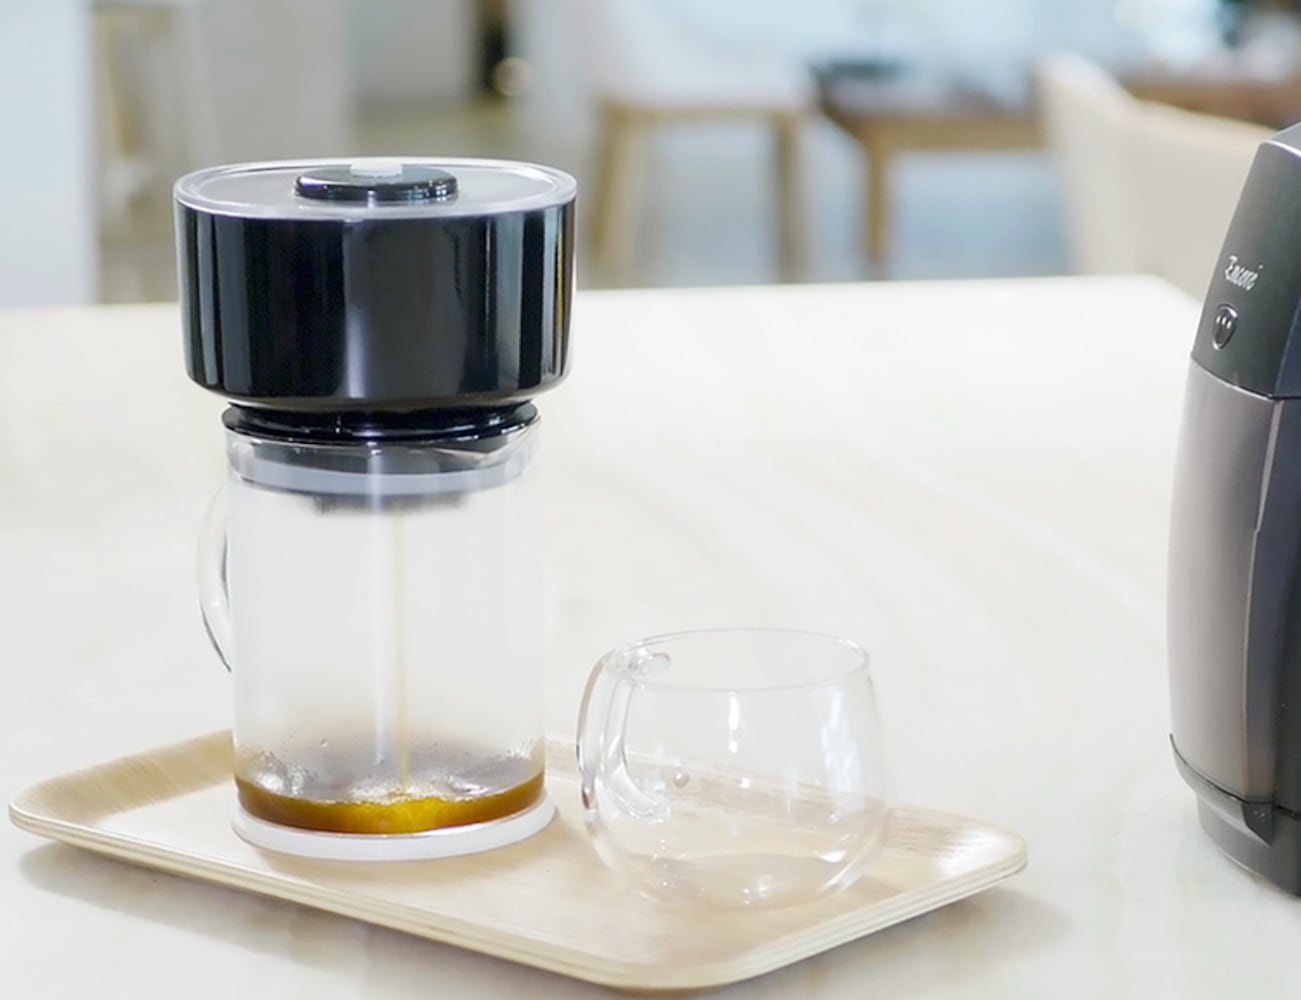 FrankOne One-Touch Specialty Coffee Brewer